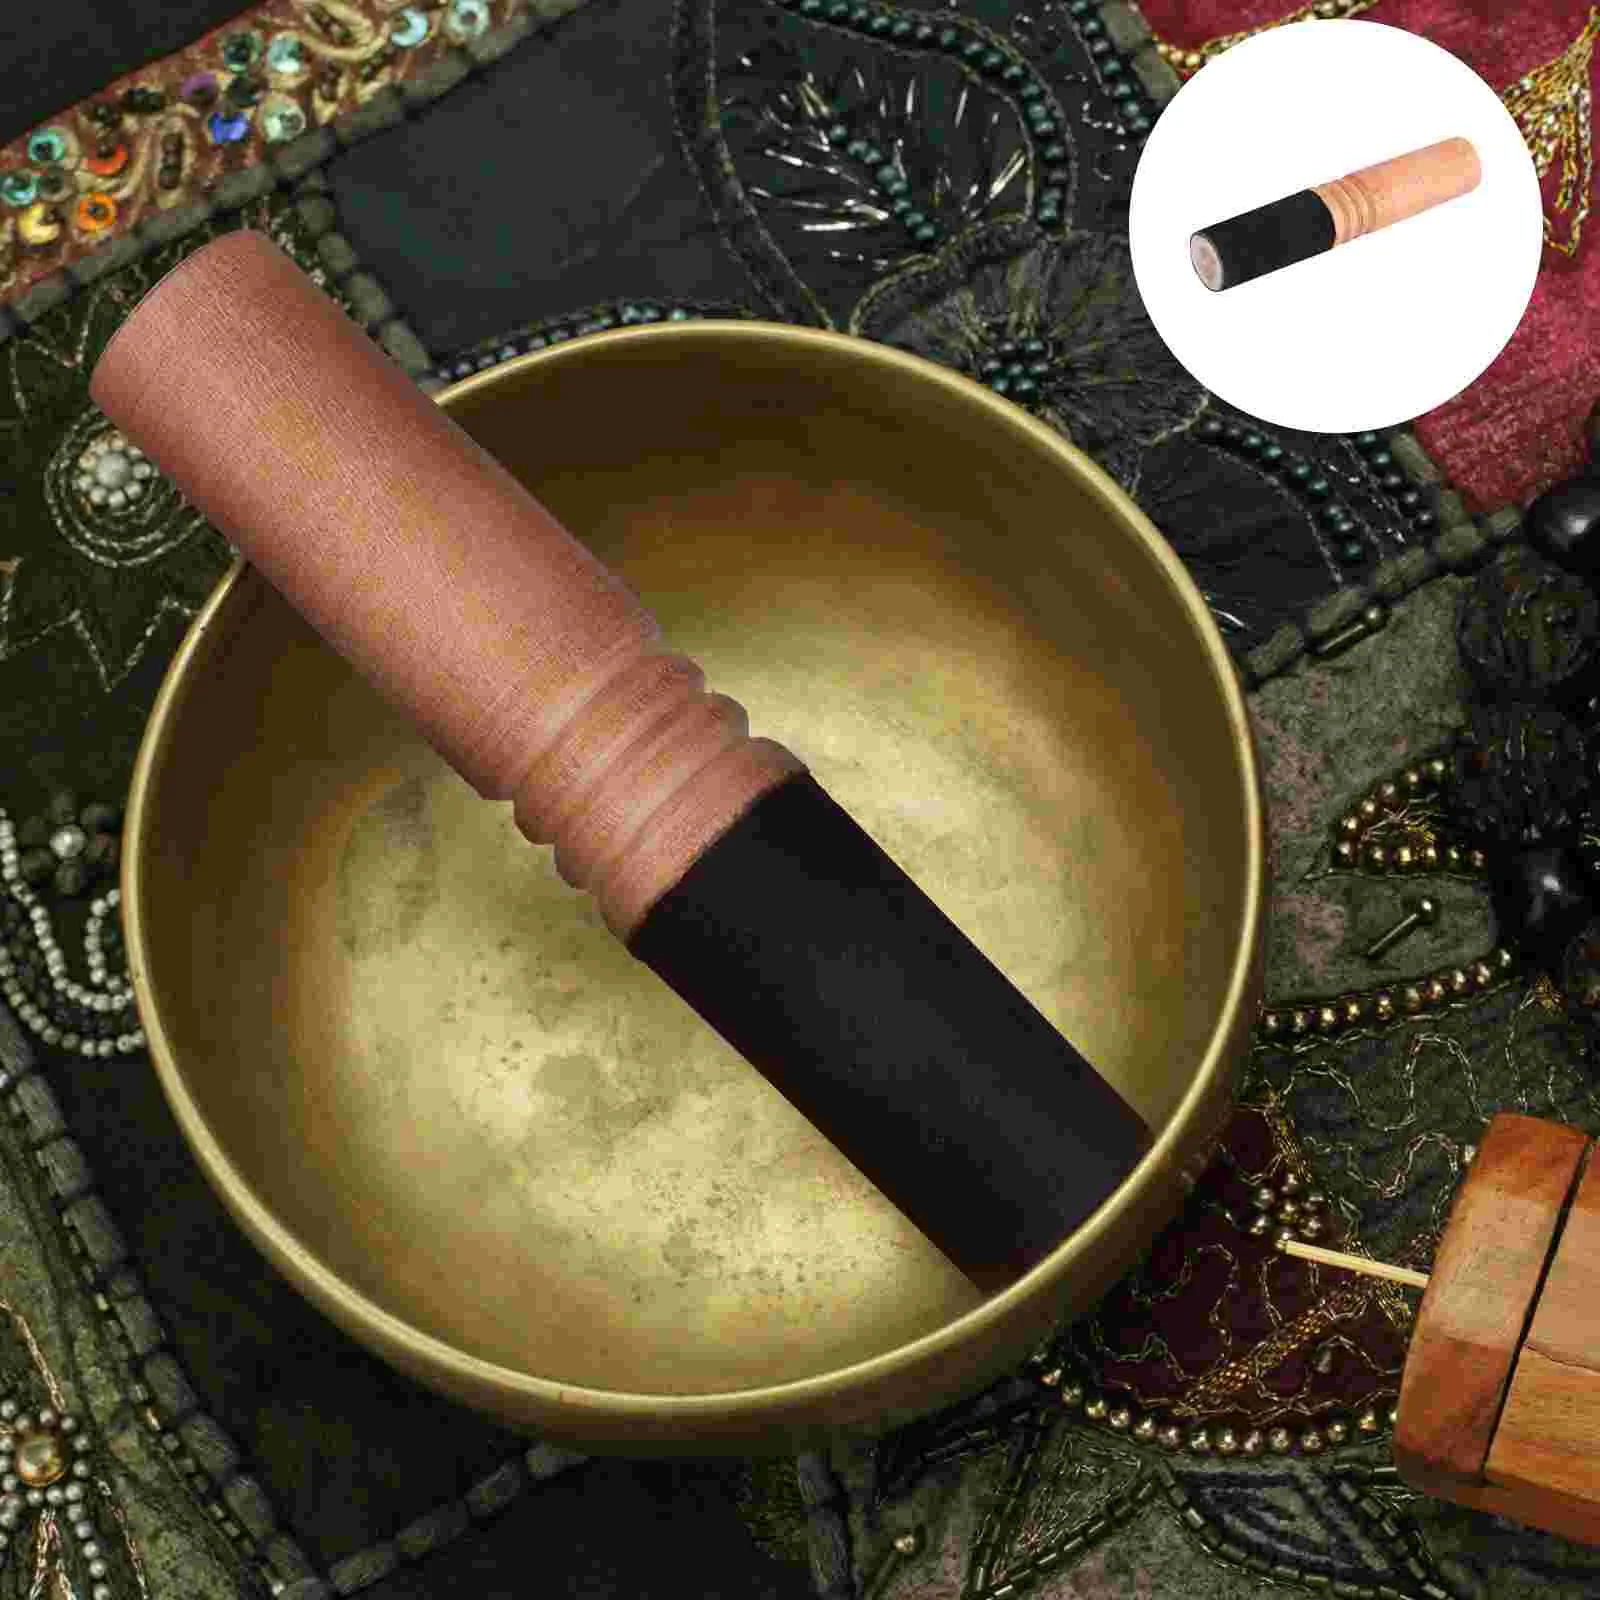 

Bowl Stick Singing Sound Mallet Meditation Tibetan Bowls Nepalese Striker Chanting Wrapped Made Hand Wood Yoga Relaxation